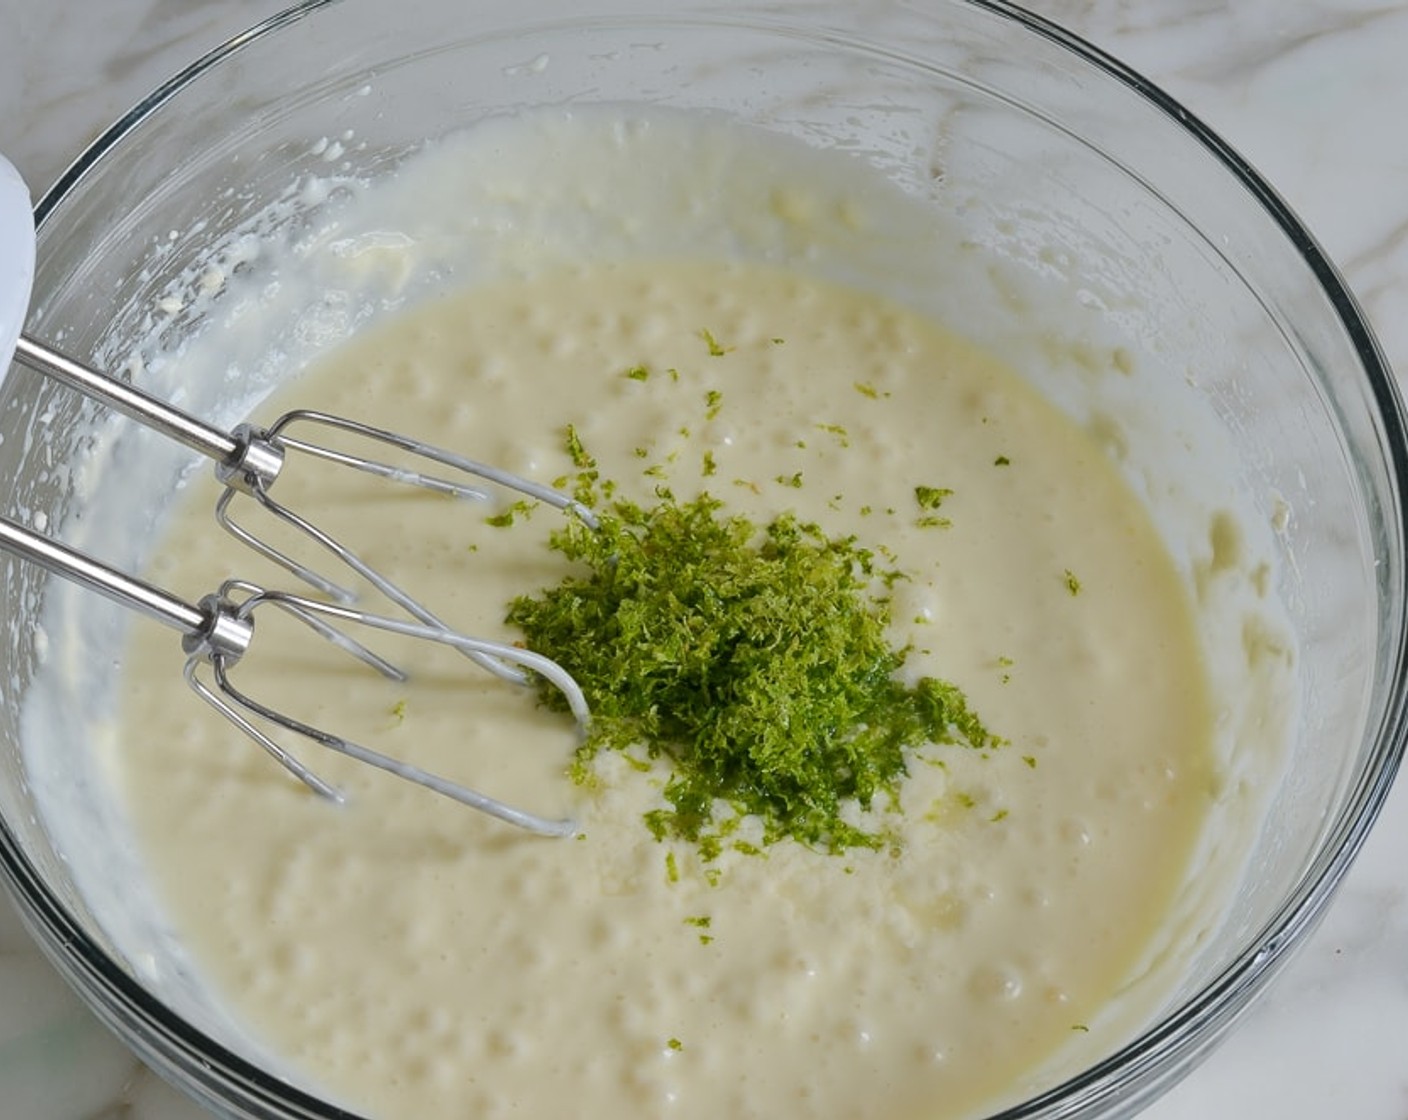 step 8 Add the Heavy Cream (1/4 cup), lime zest, lime juice and Salt (1 pinch). Beat until evenly combined, about 30 seconds.